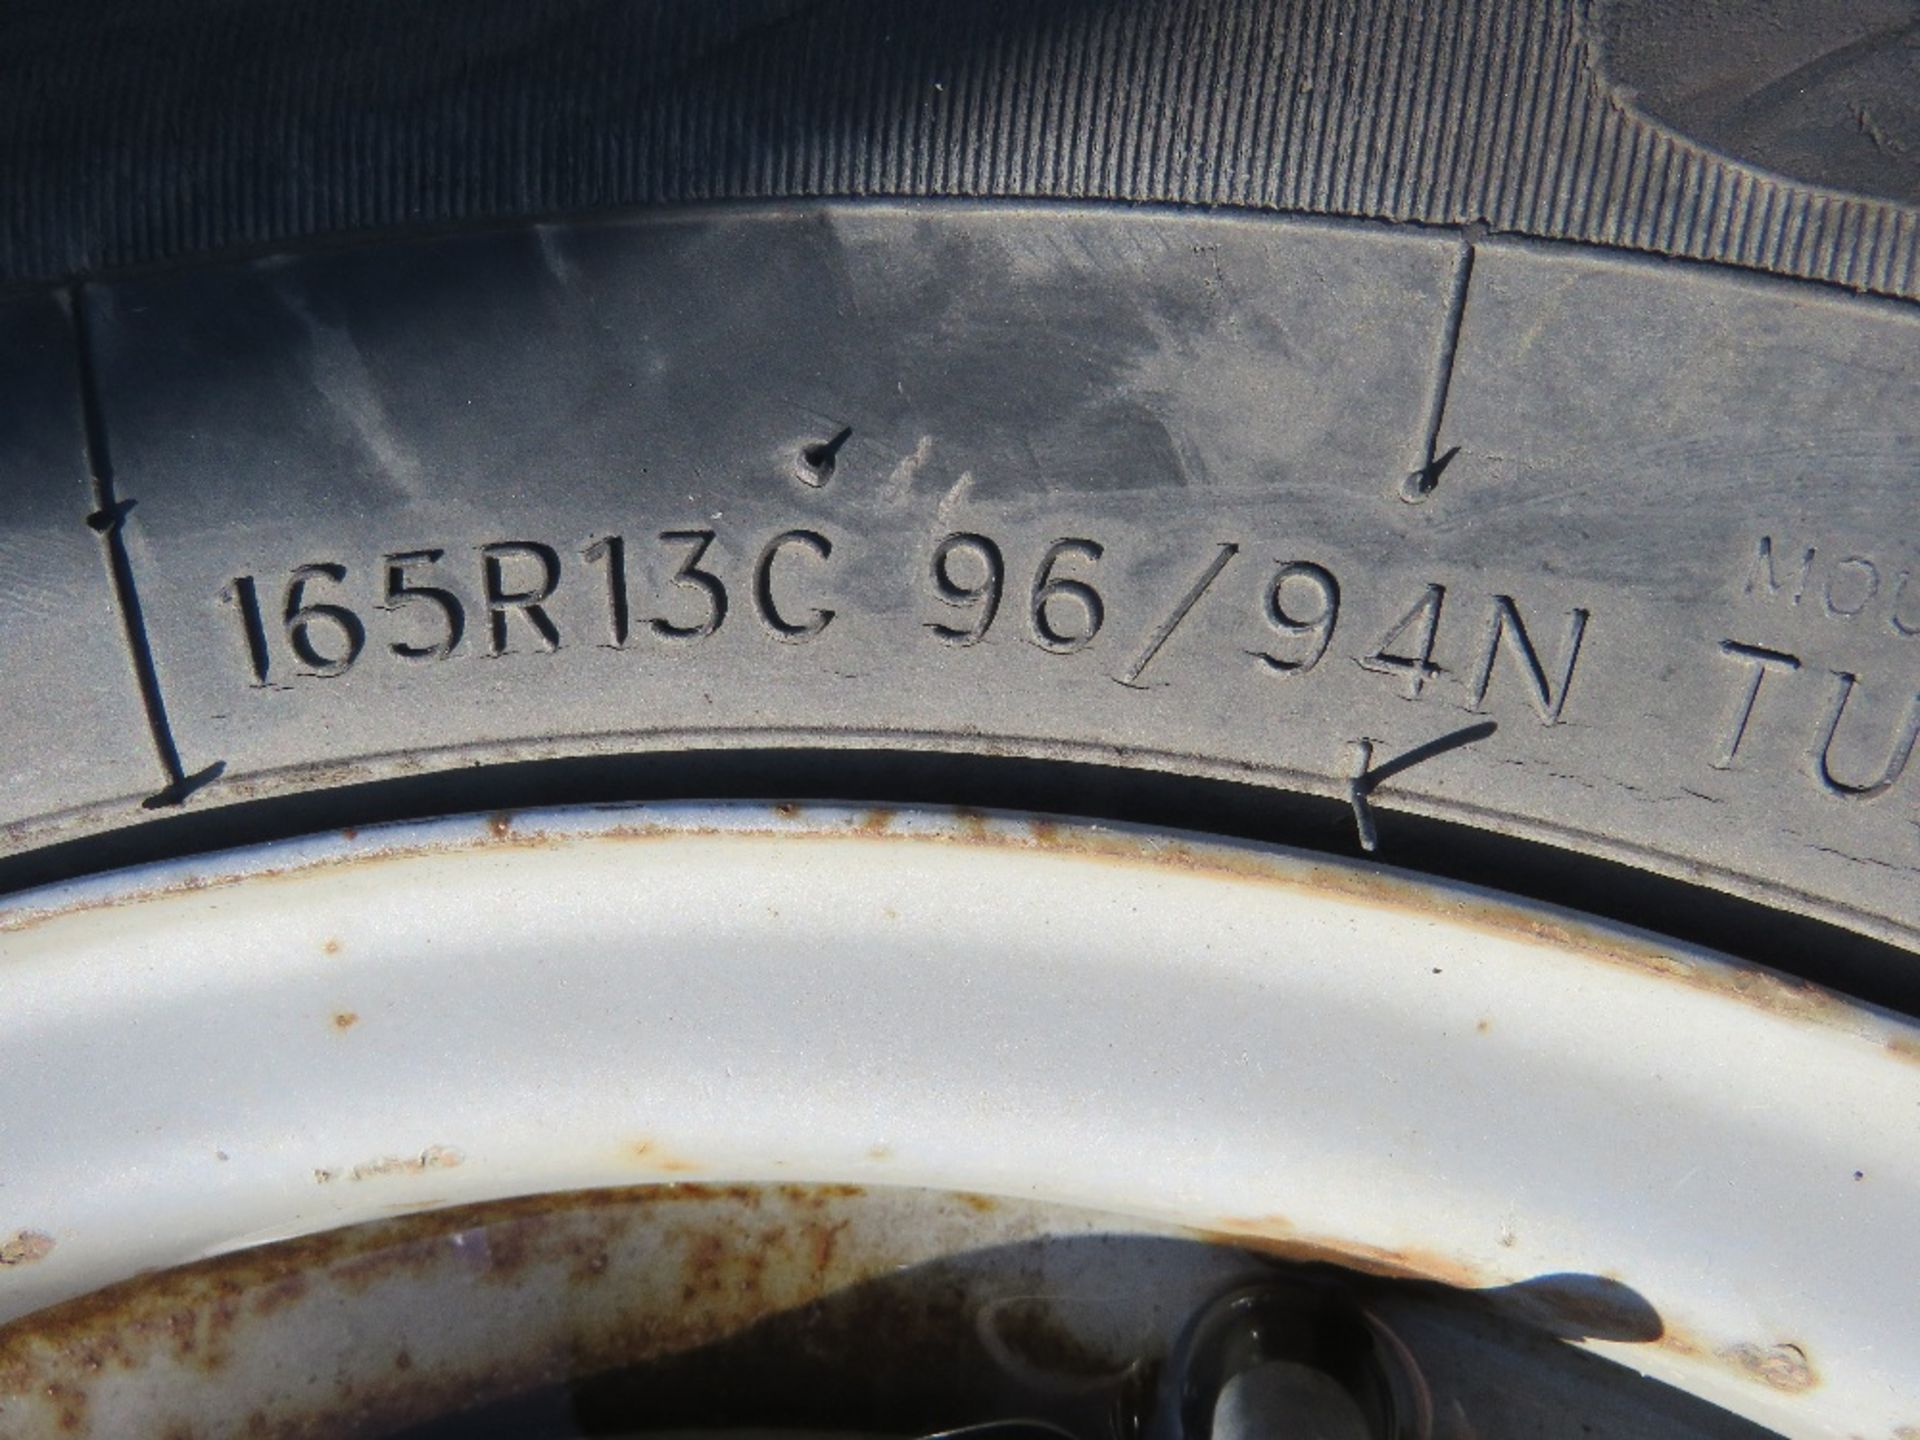 4 X TRAILER WHEELS AND TYRES. 165R13C95/94N SIZE. - Image 3 of 4